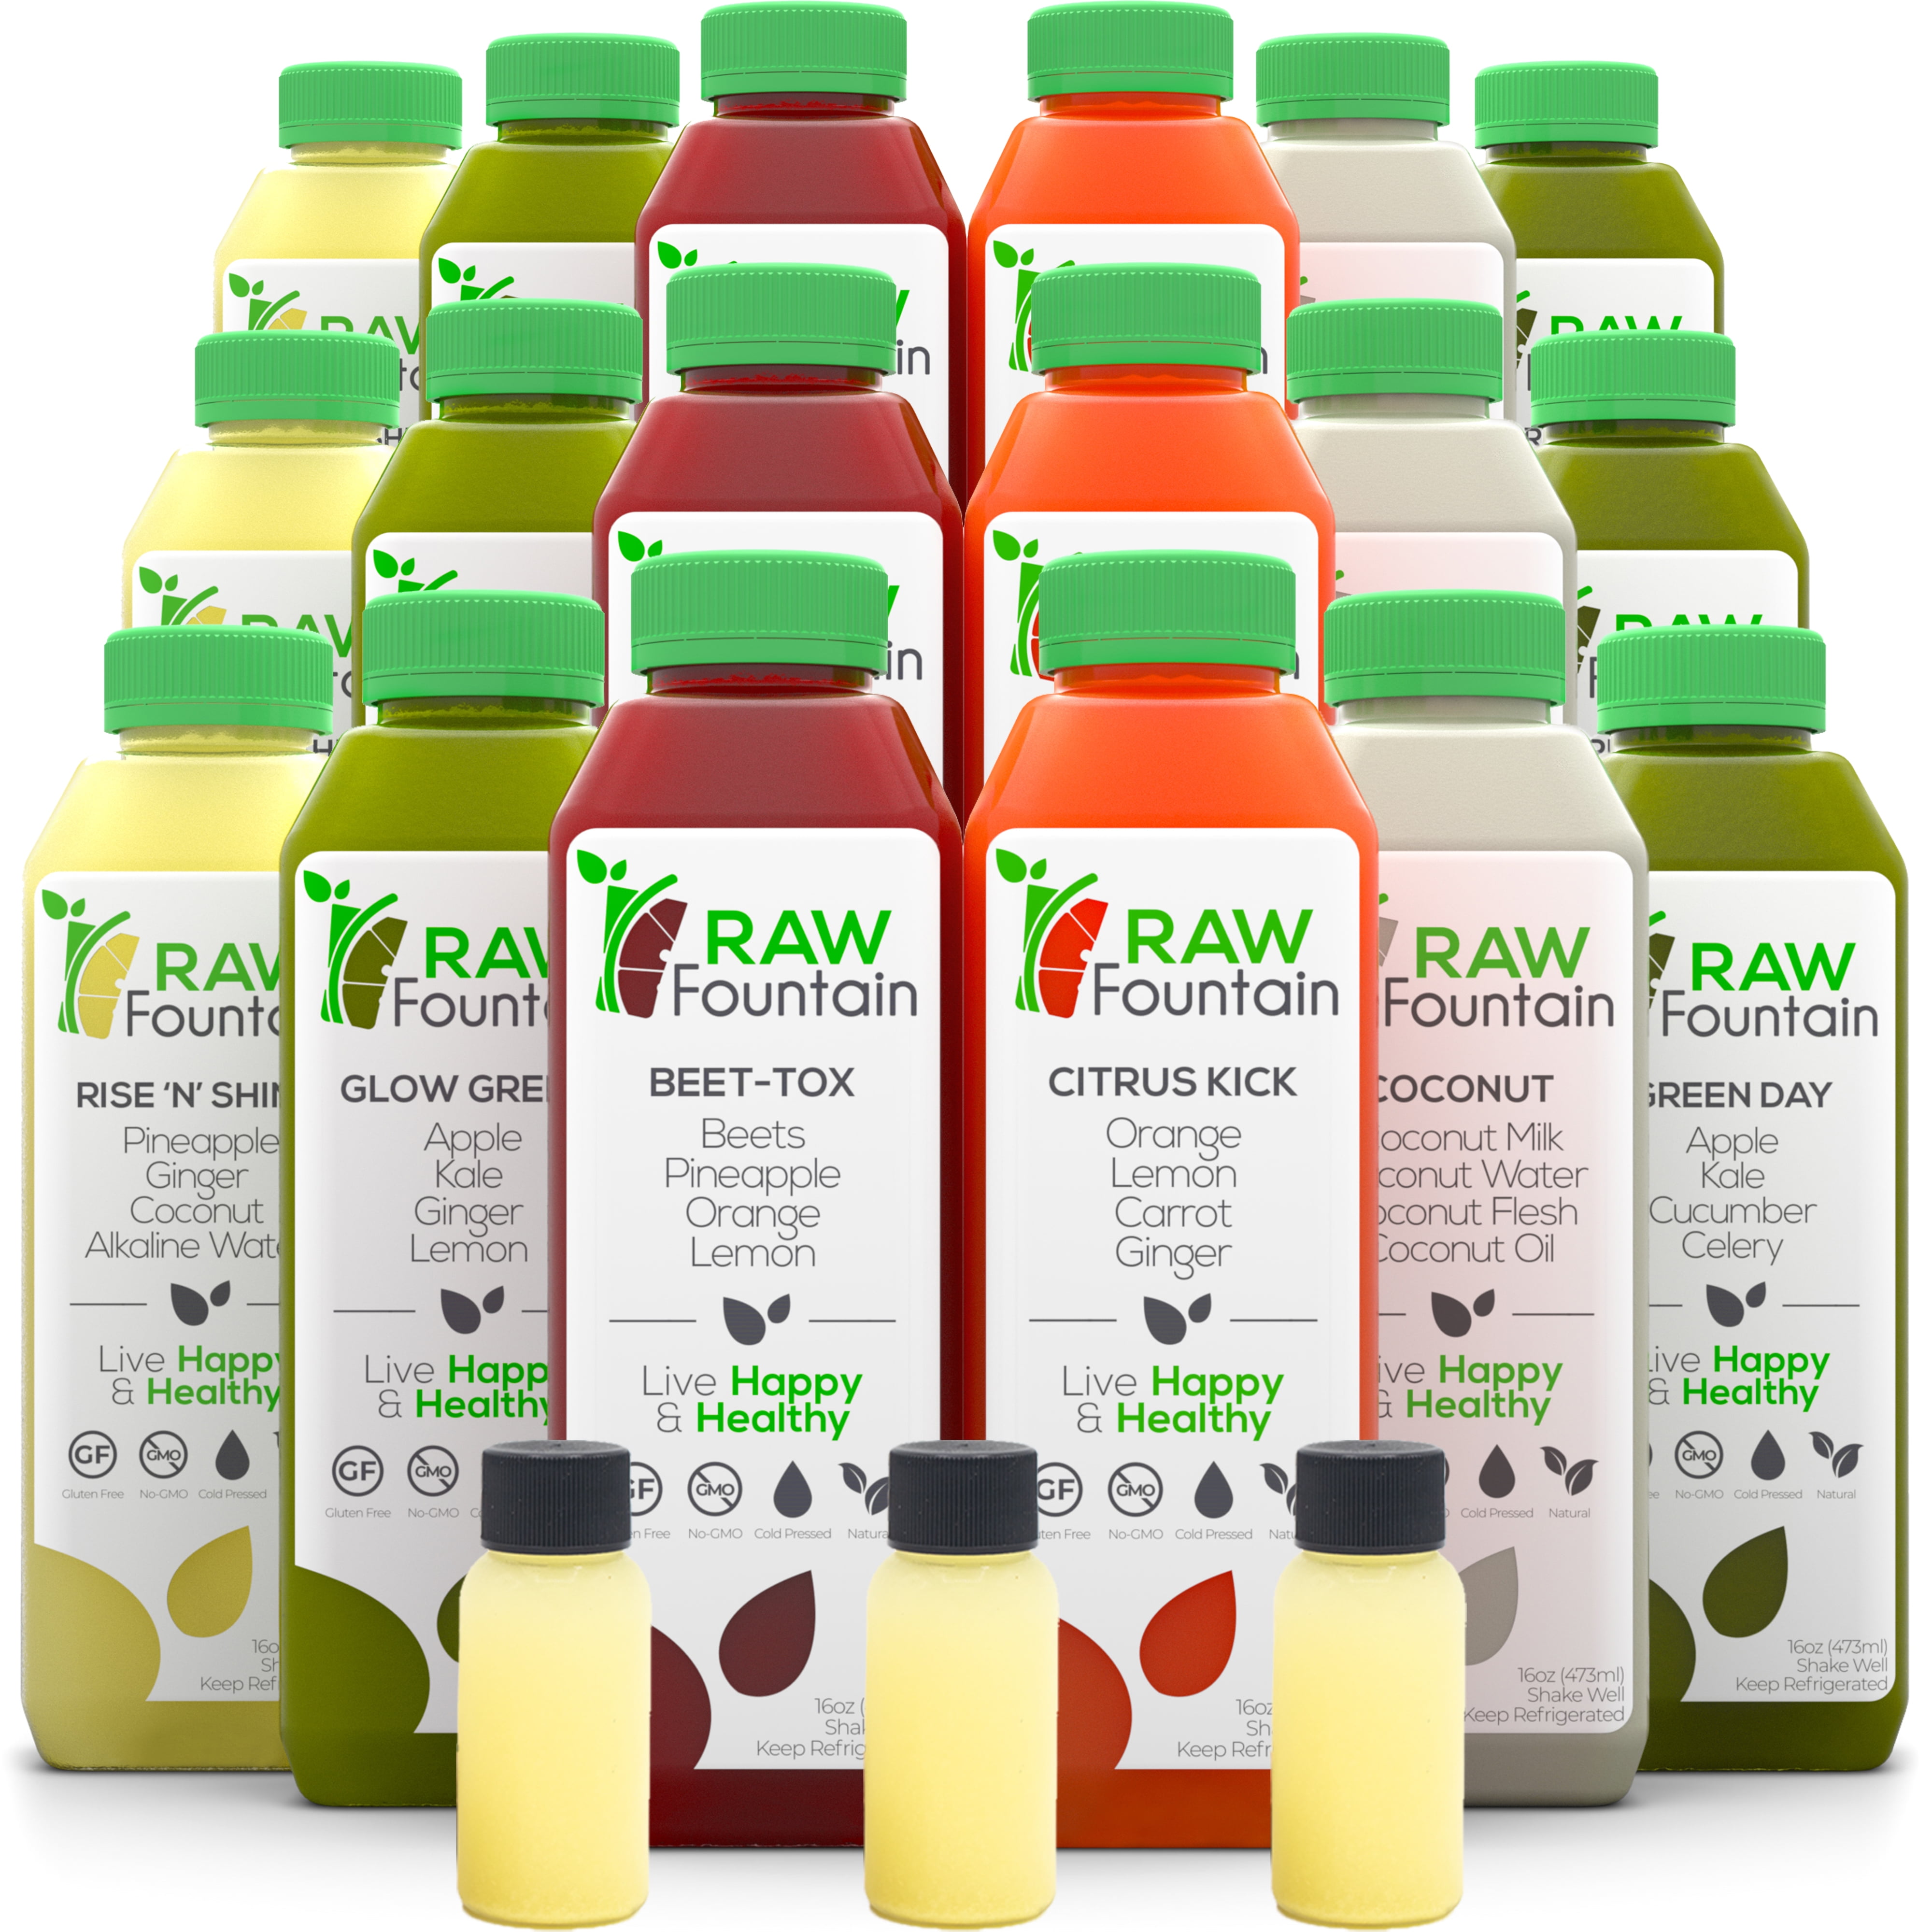 Juice Shop  100% RAW Organic Cold-Pressed Juices Cleanses & Elixirs